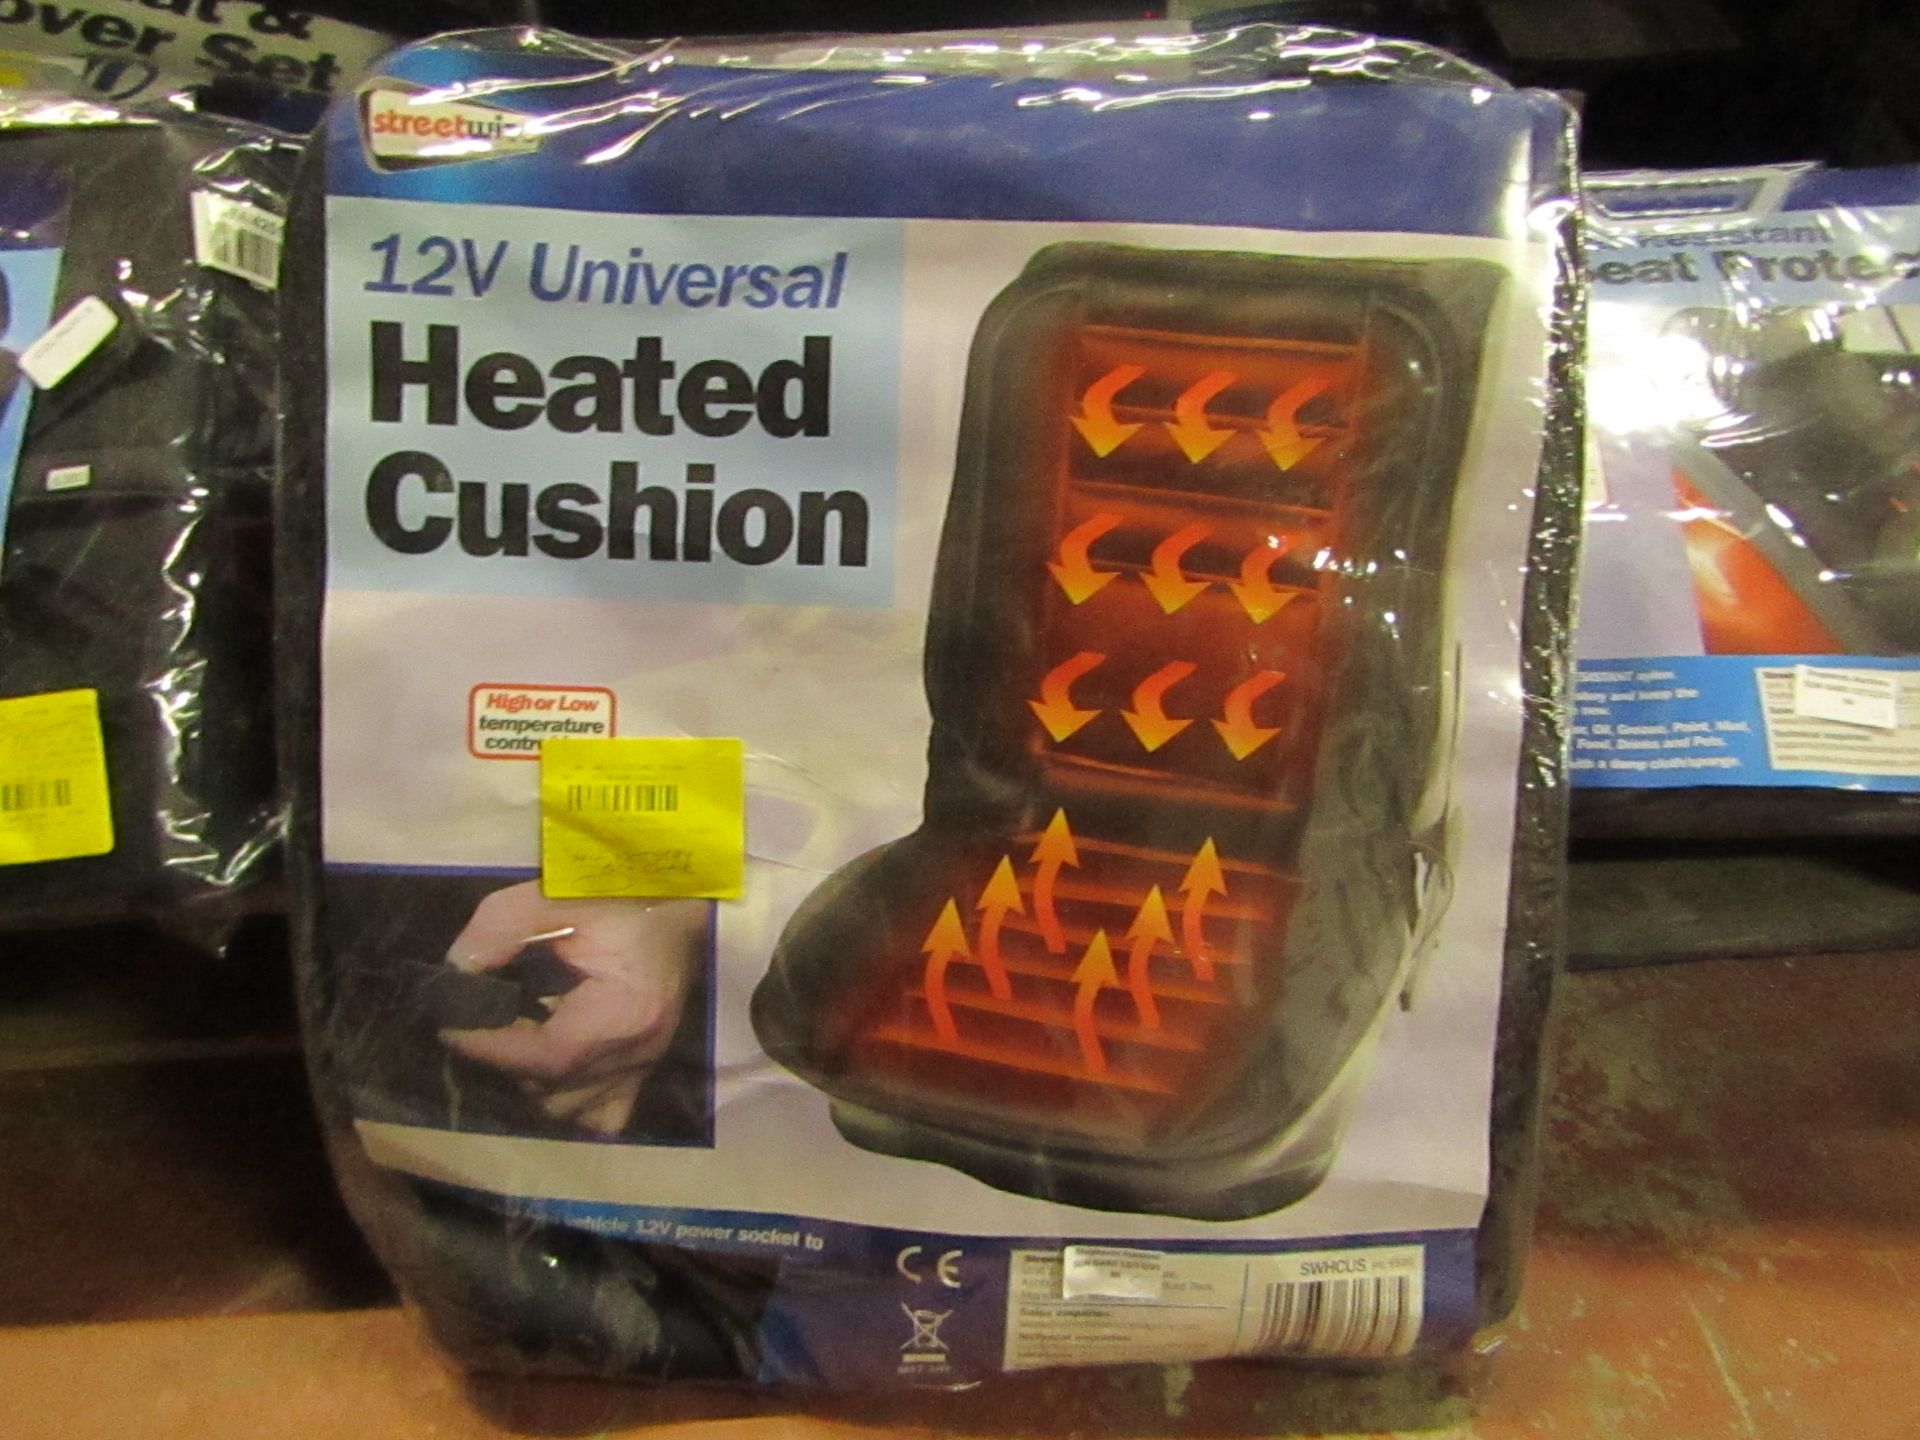 5x Streetwize 12v Universal Heated Cushion, Unchecked & Packaged.